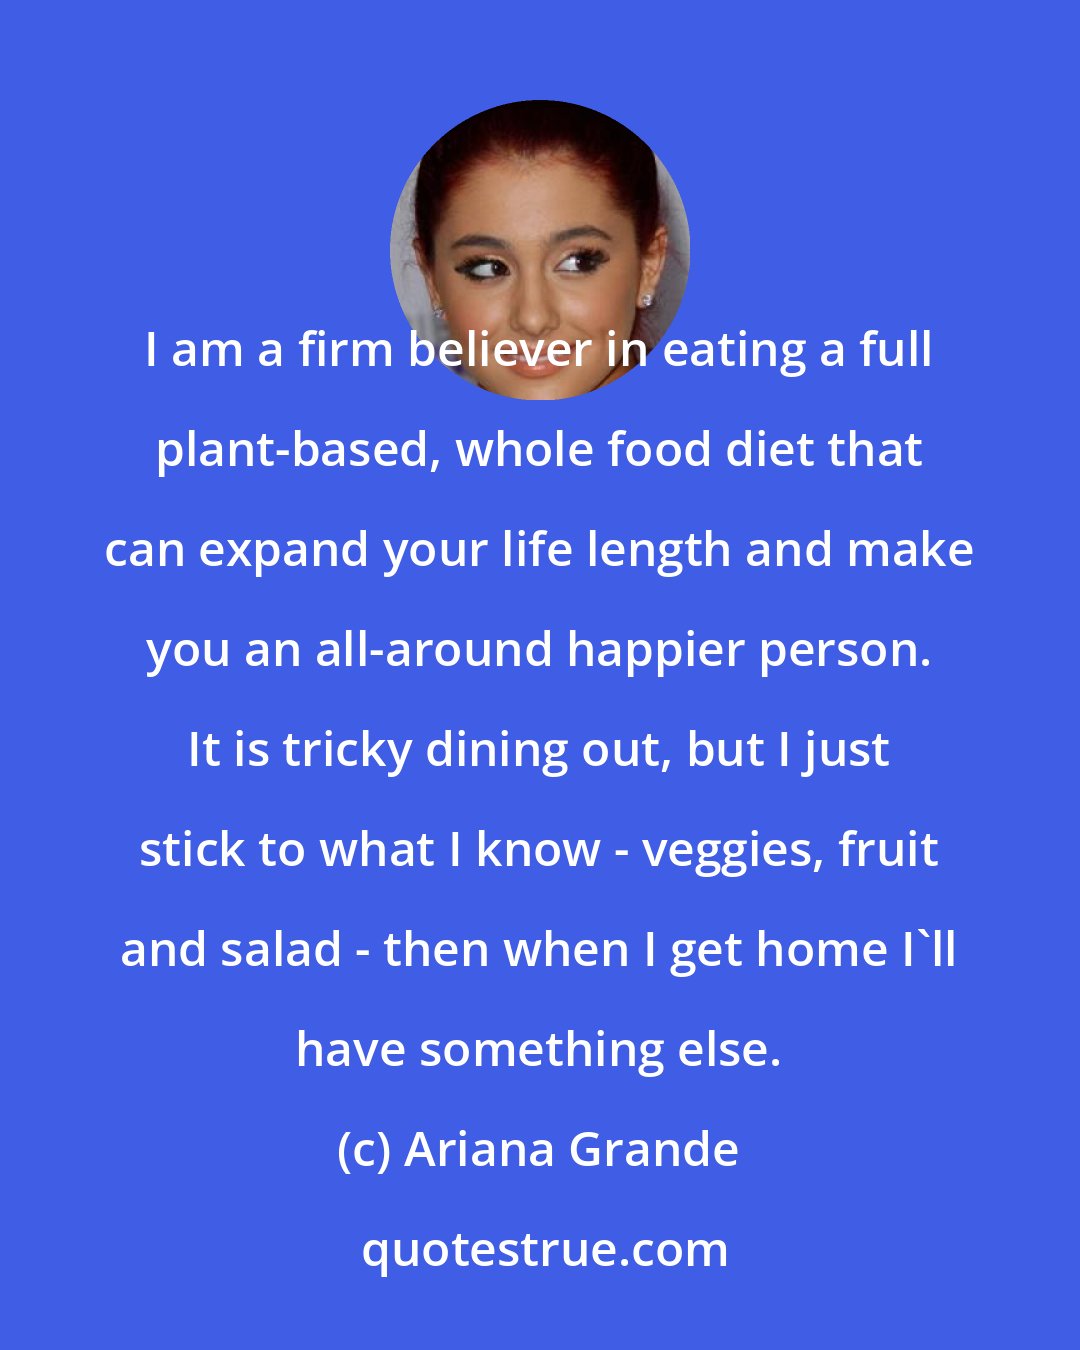 Ariana Grande: I am a firm believer in eating a full plant-based, whole food diet that can expand your life length and make you an all-around happier person. It is tricky dining out, but I just stick to what I know - veggies, fruit and salad - then when I get home I'll have something else.